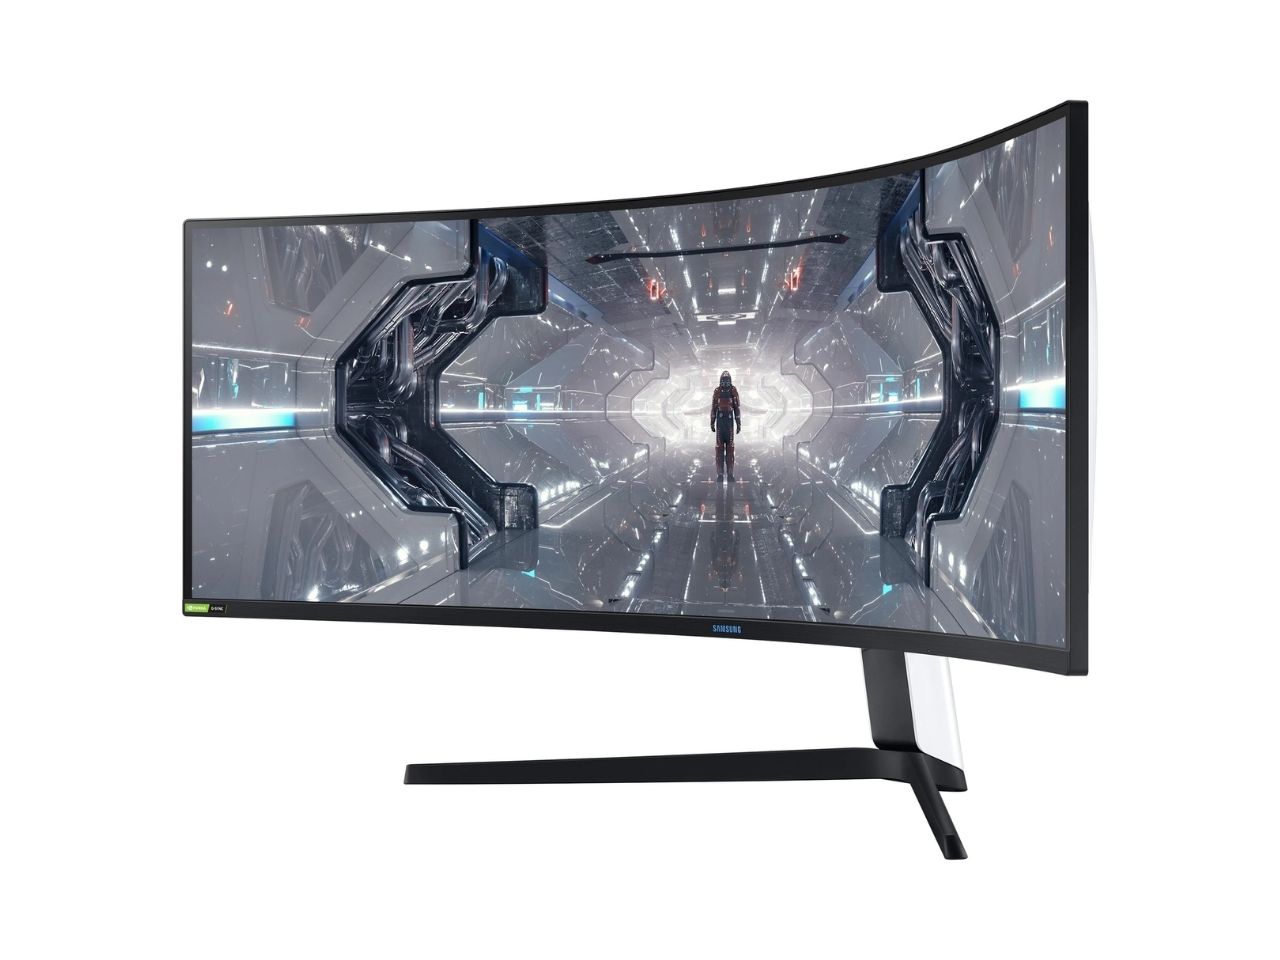 Samsung Odyssey G9 Gaming Monitor on a white background.